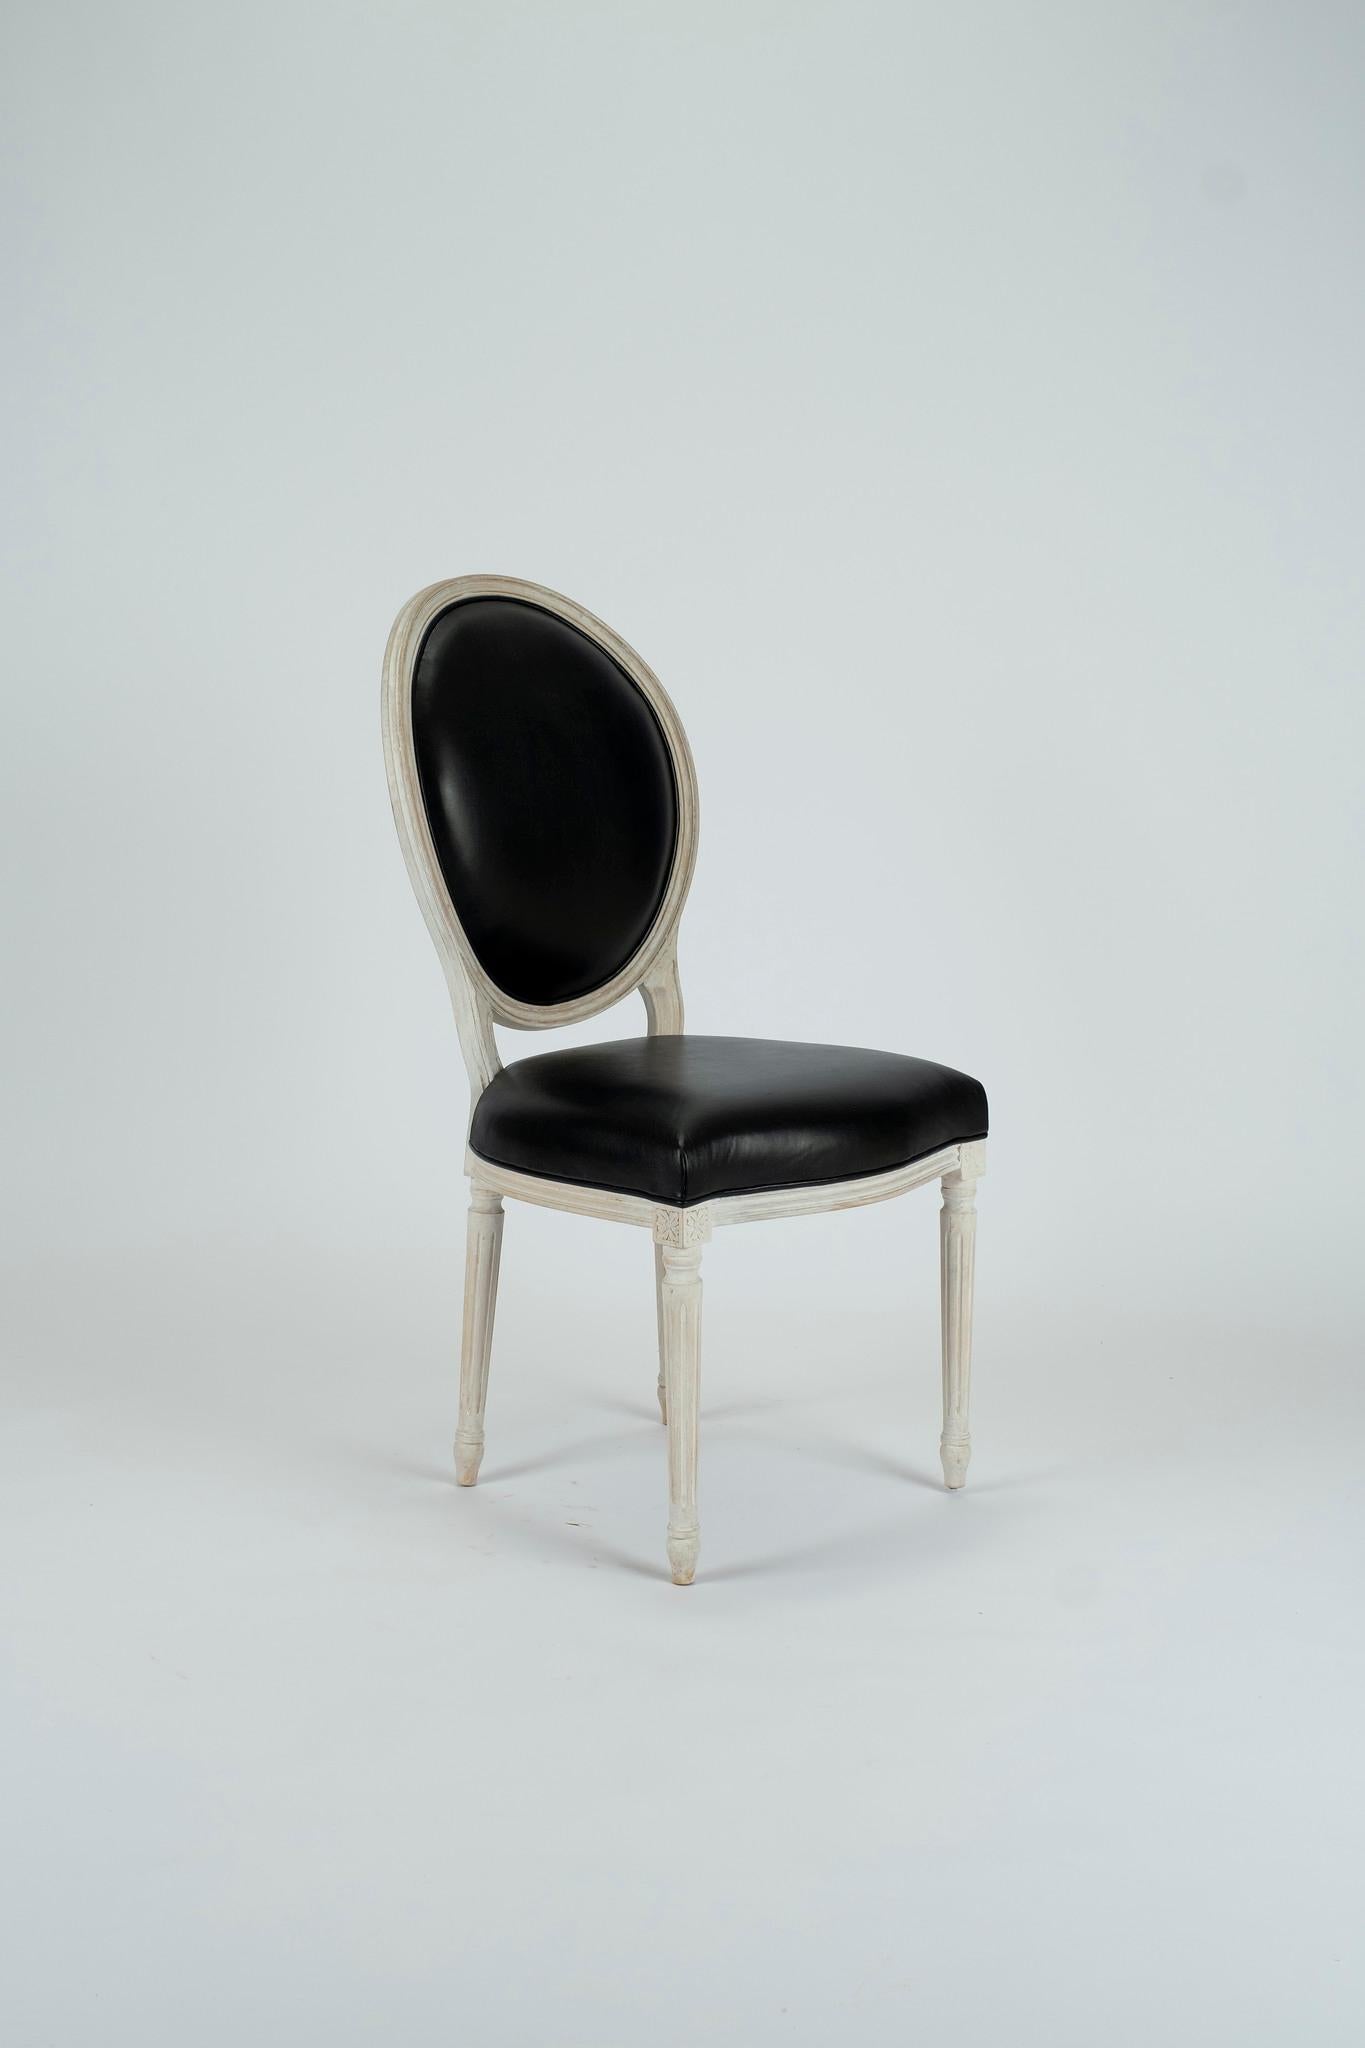 A custom white waxed Italian beechwood frame upholstered in black leather.

Also available C.O.M.